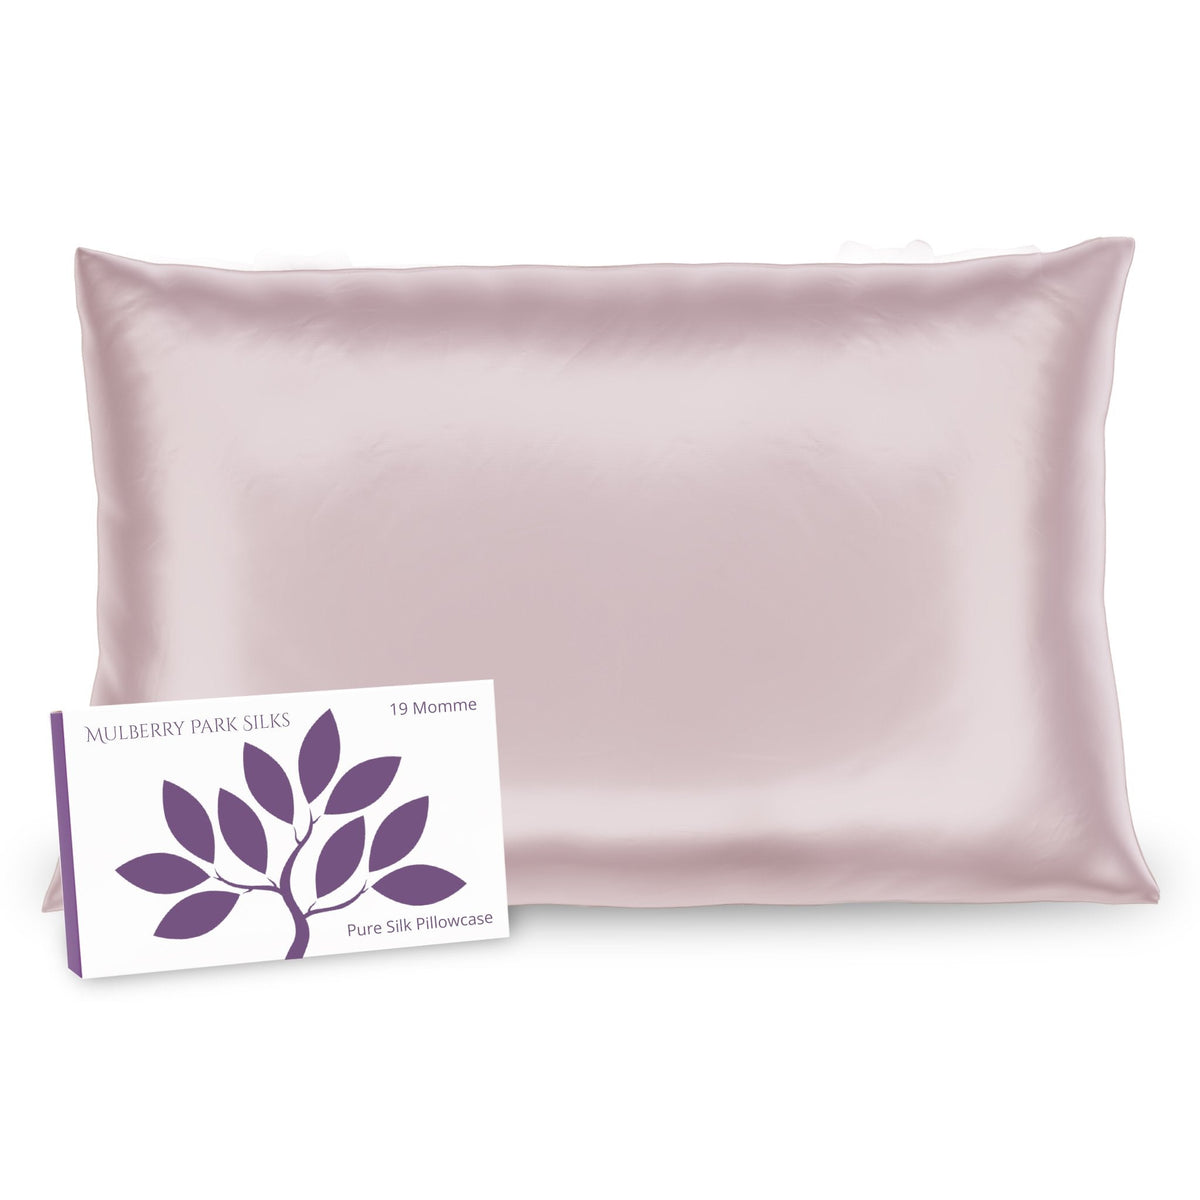 Mulberry Park Silks Deluxe 19 Momme Pure Silk Pillowcase in Pink Color with Box